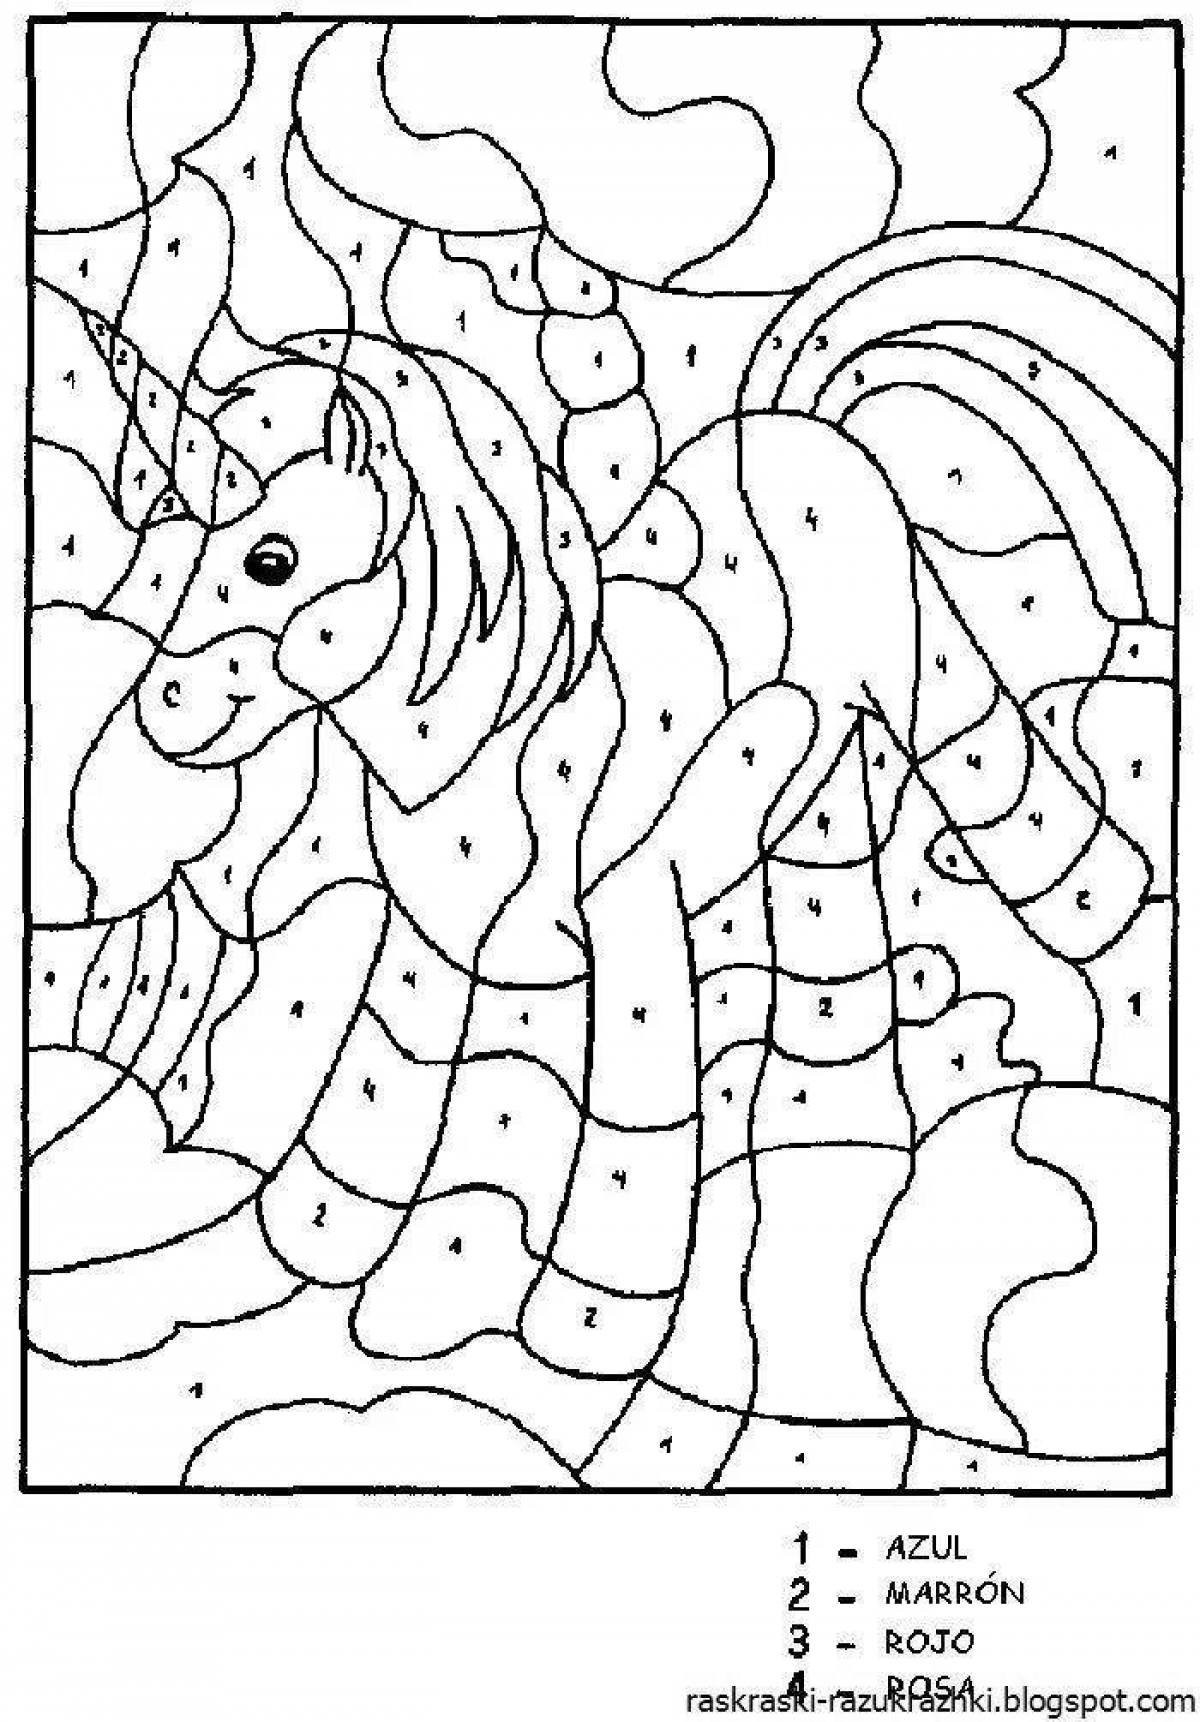 Sublime coloring page by numbers black and white